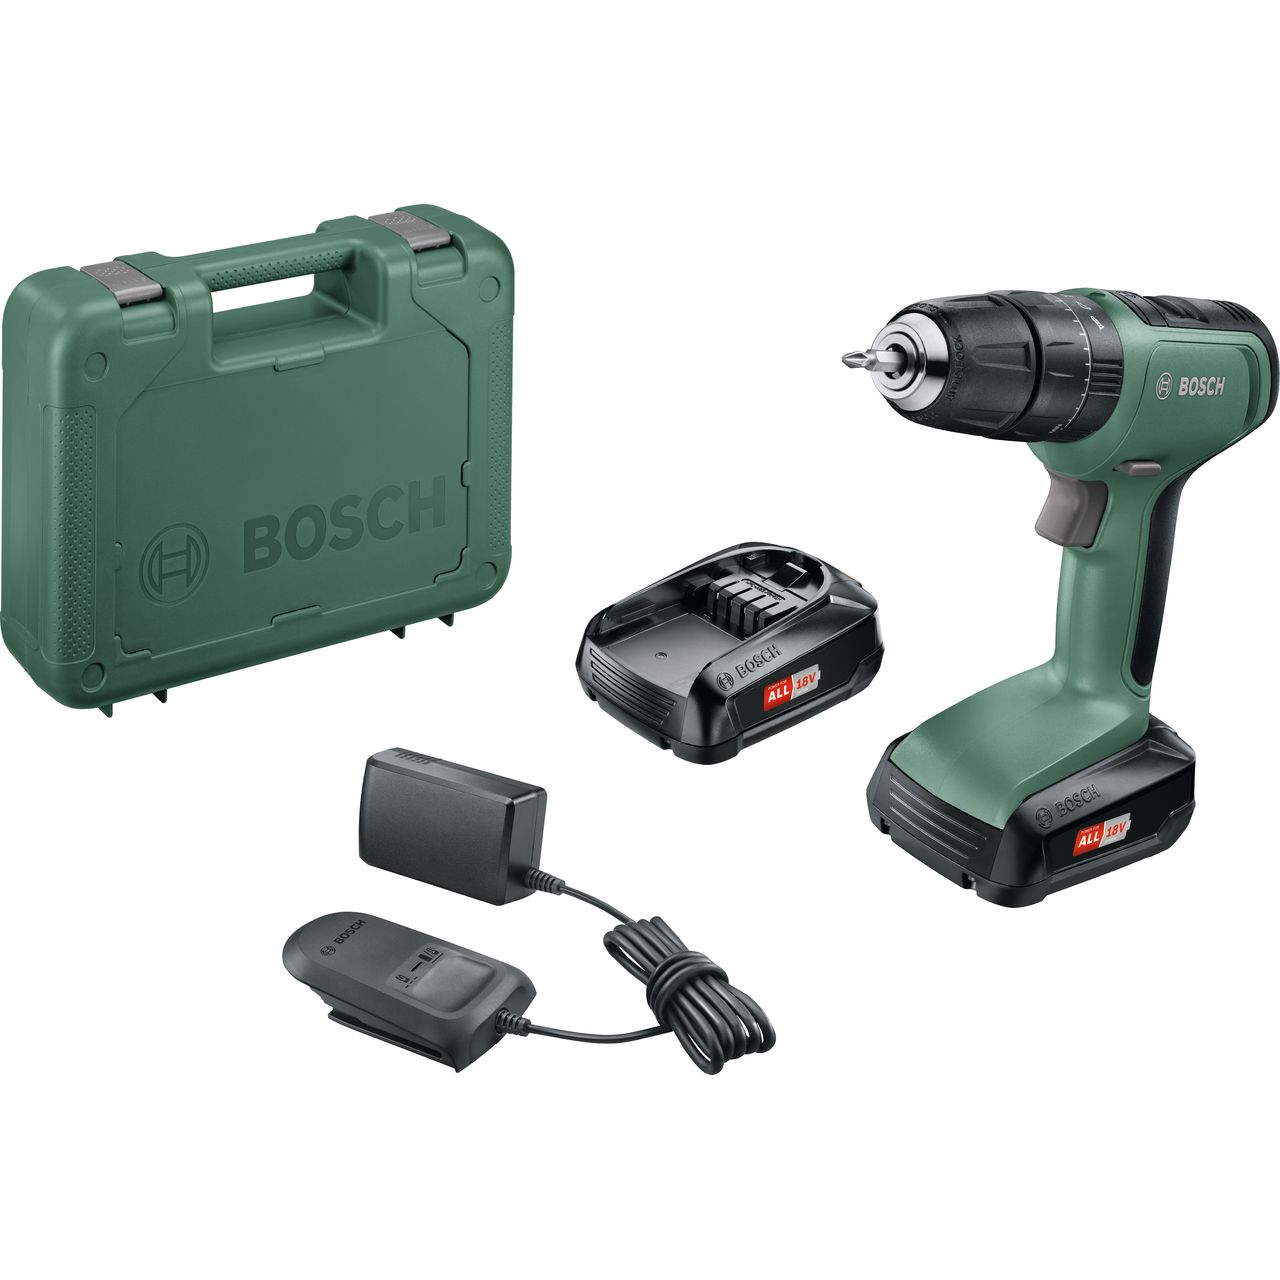 Bosch UniversalImpact 18 18 Volts Cordless Impact Drill Review